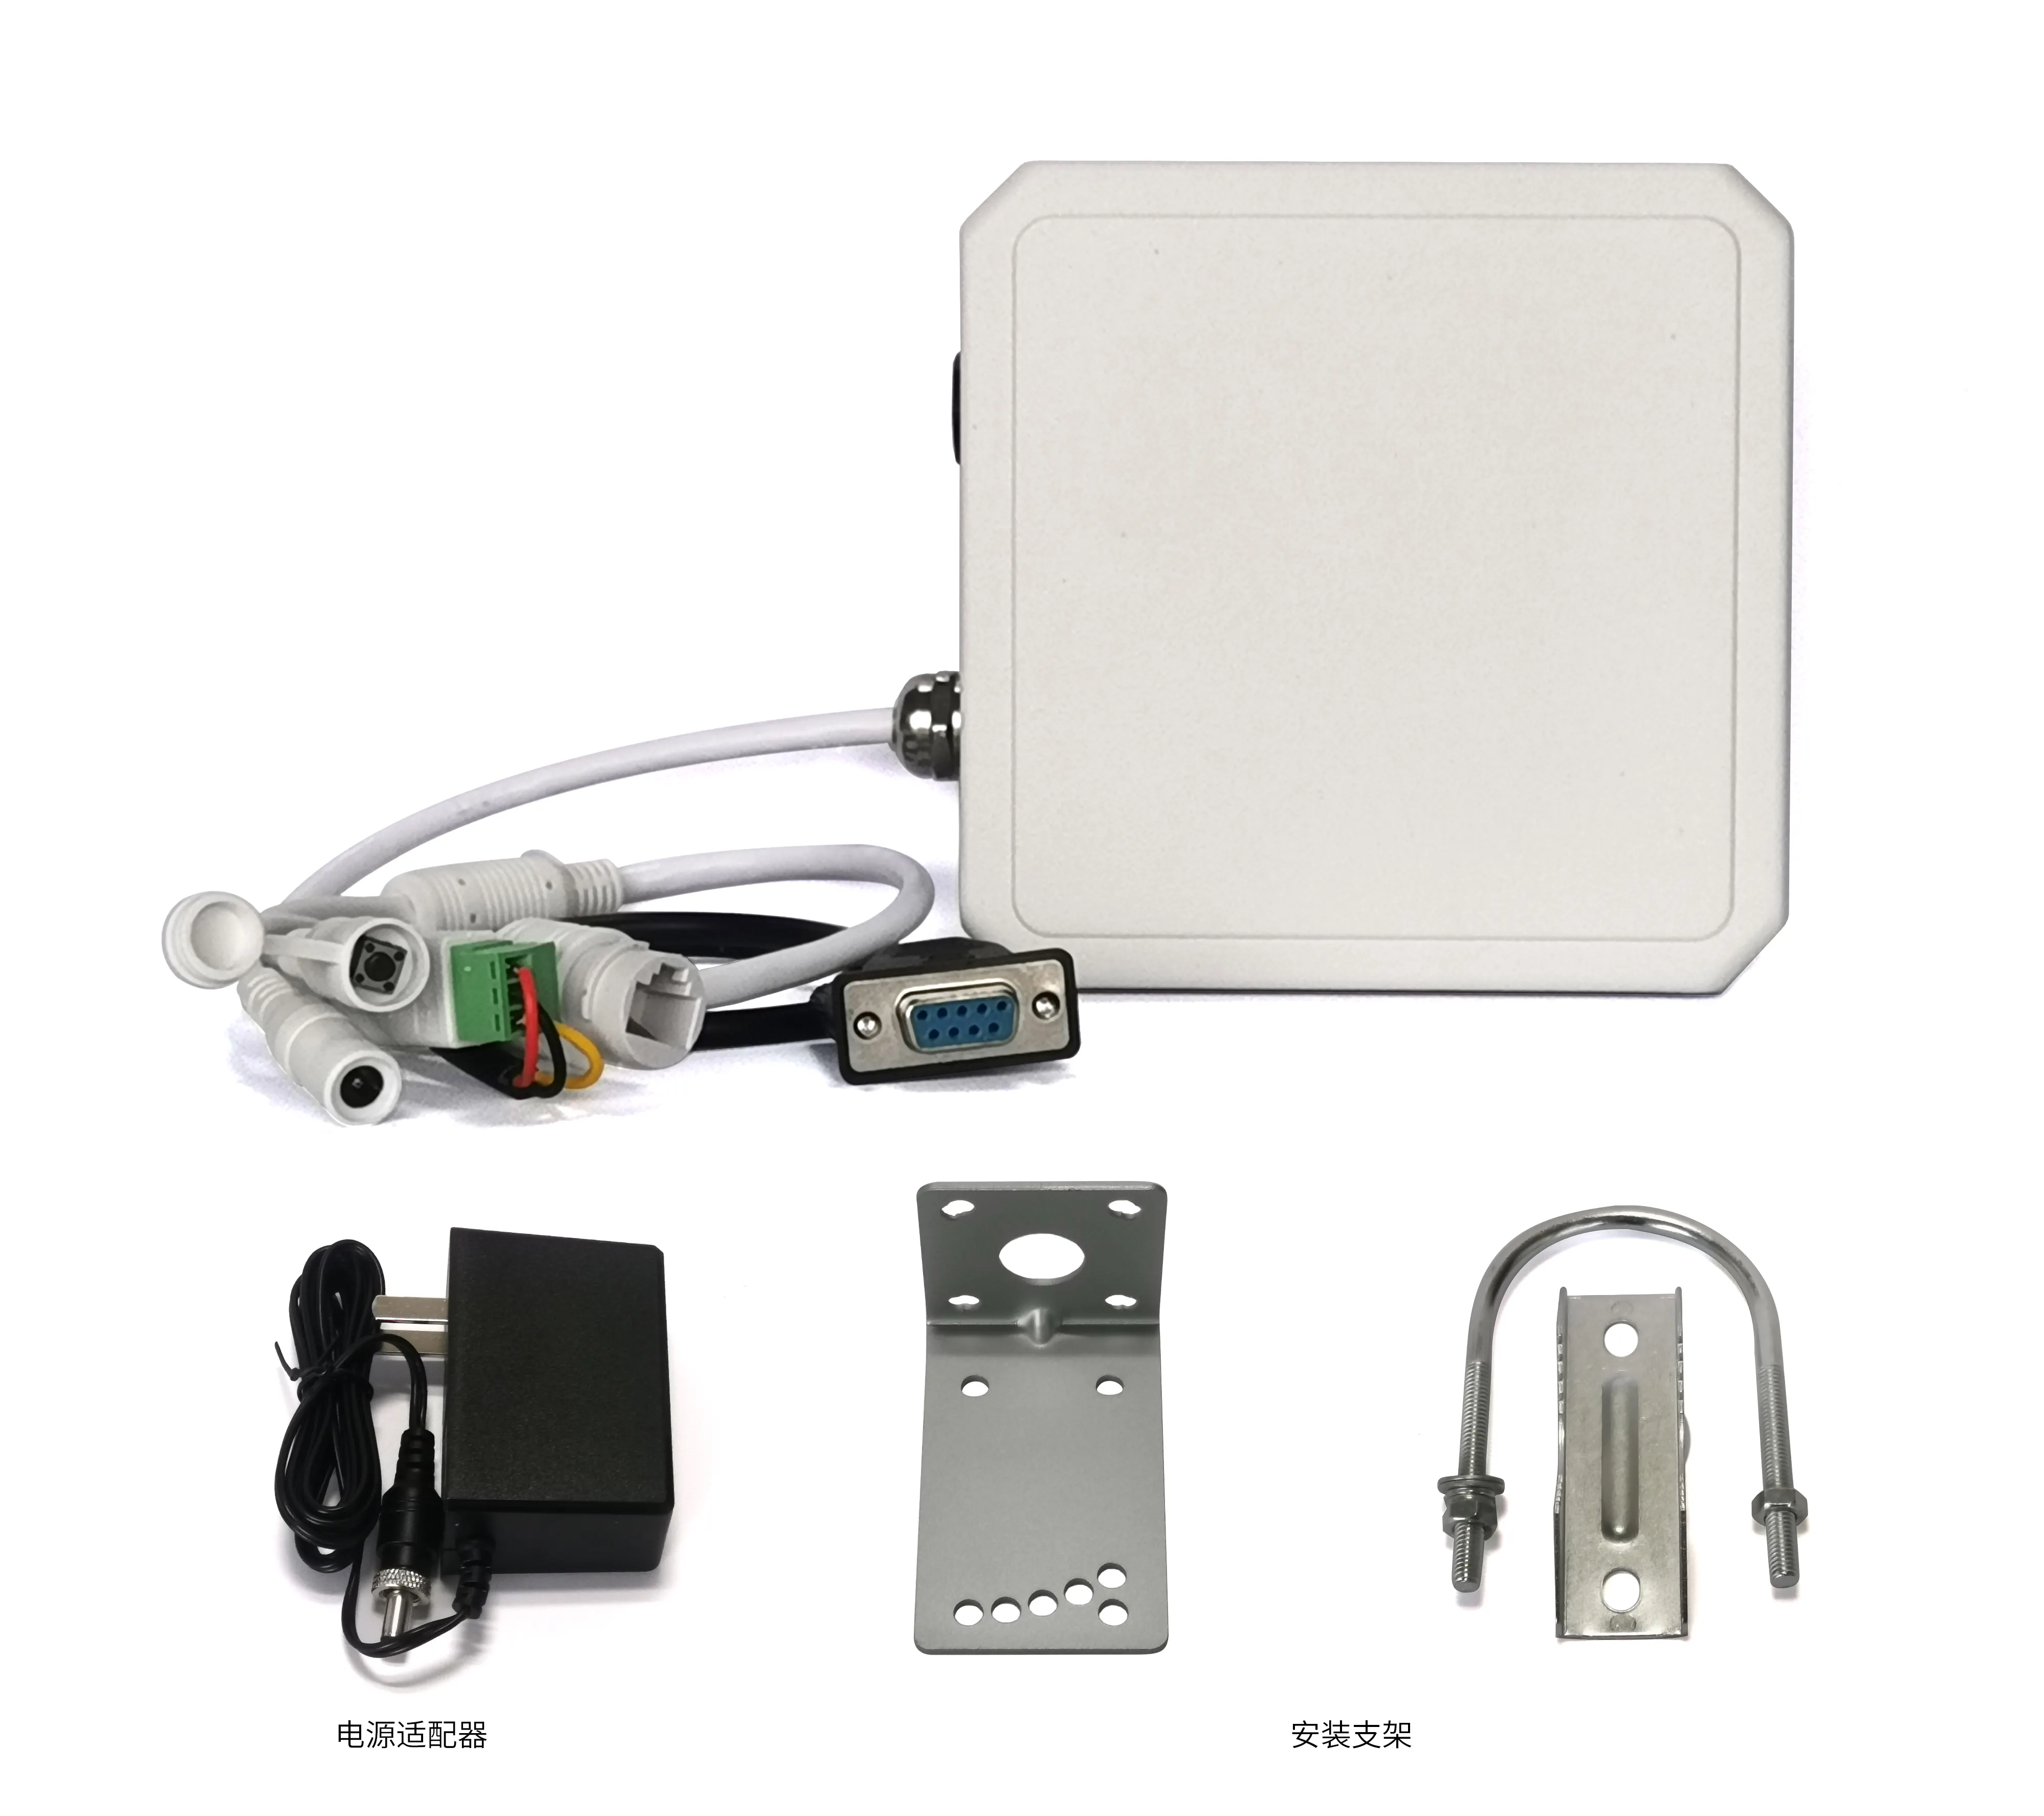 UHF RFID Fixed Reader with Long Range Integrated Antenna USB RS232 WG26 for Parking Access Control Portable Wiegand Interface